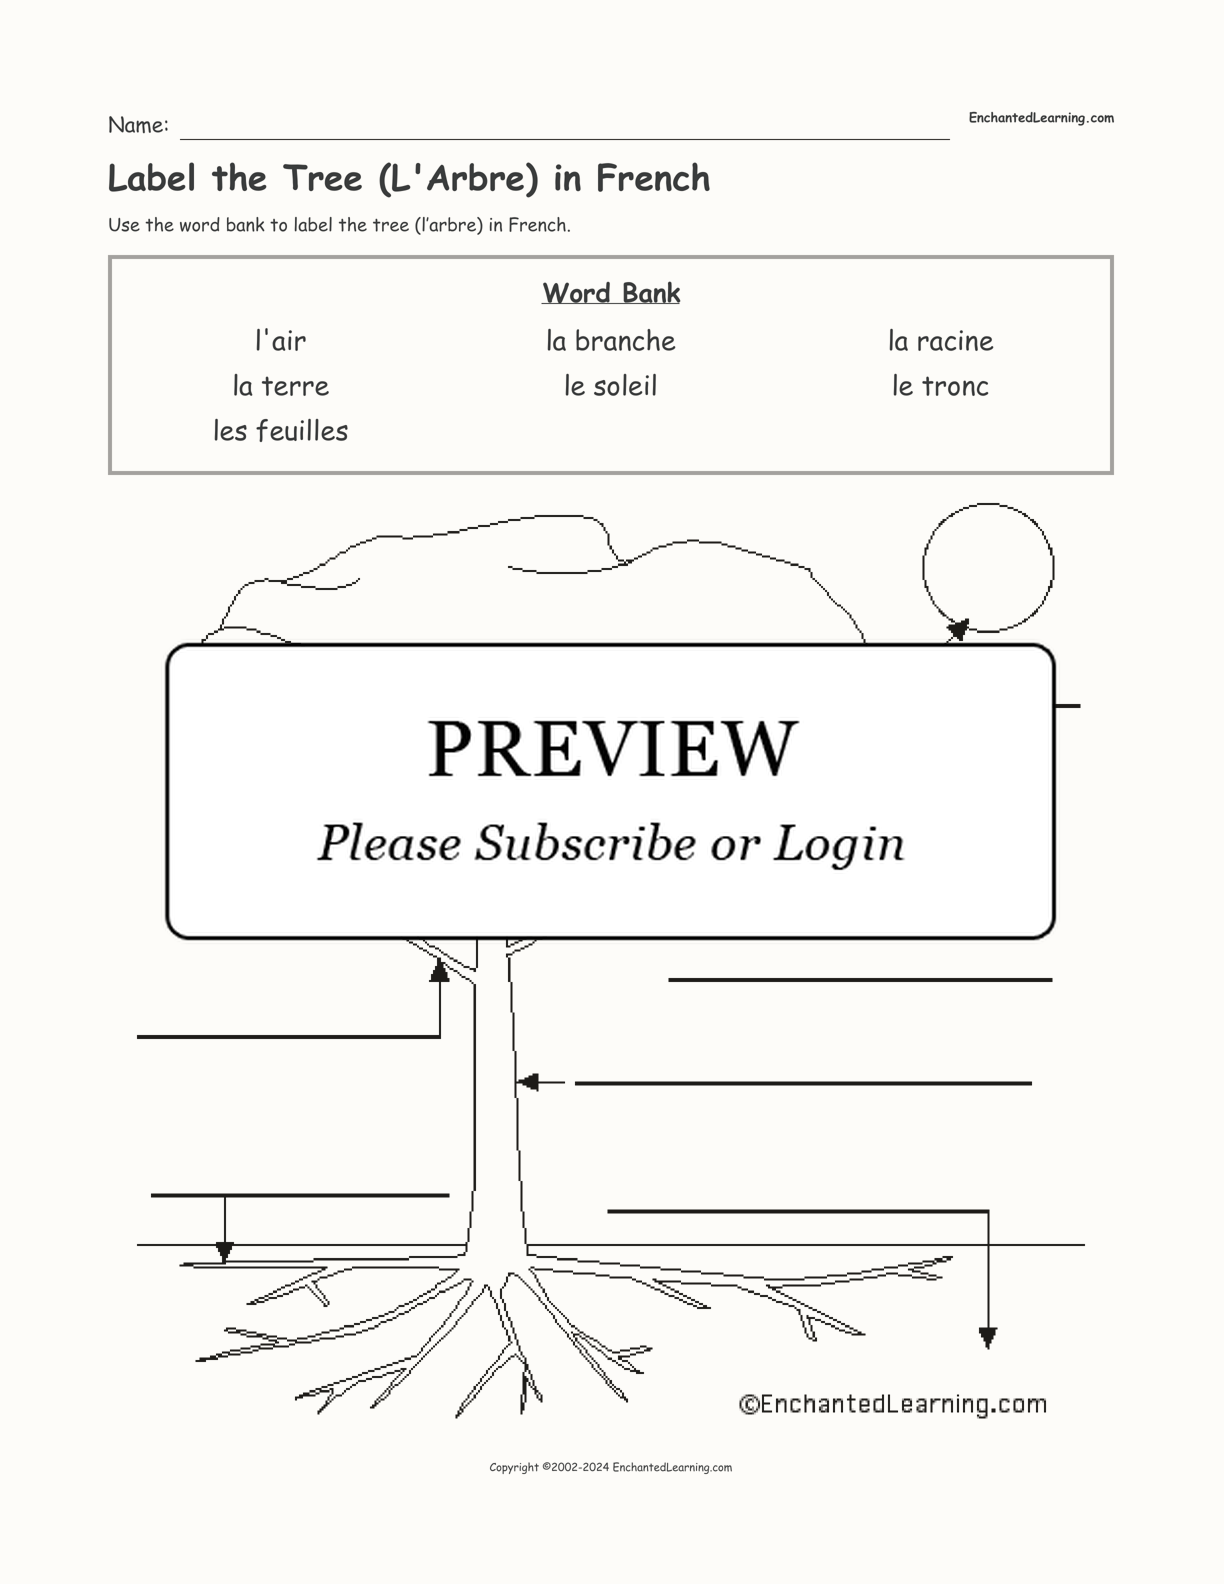 Label the Tree (L'Arbre) in French interactive worksheet page 1